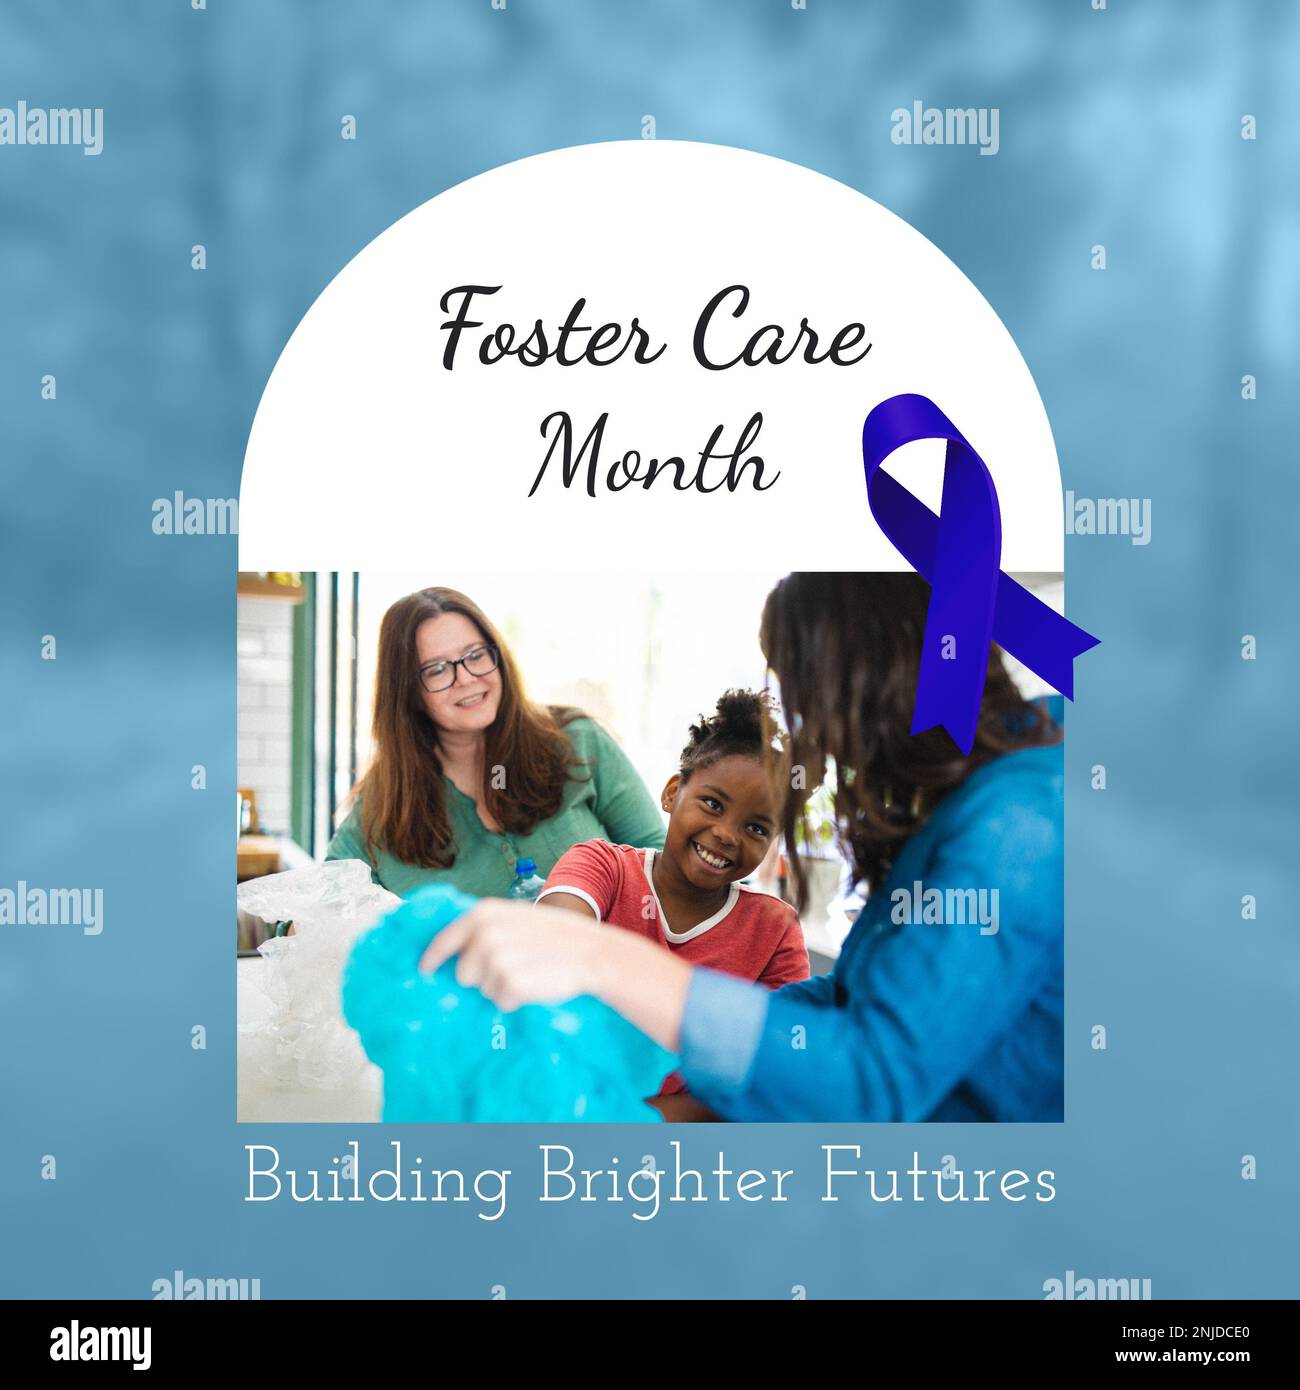 Foster care month and building brighter future text over multiracial women playing with smiling girl Stock Photo